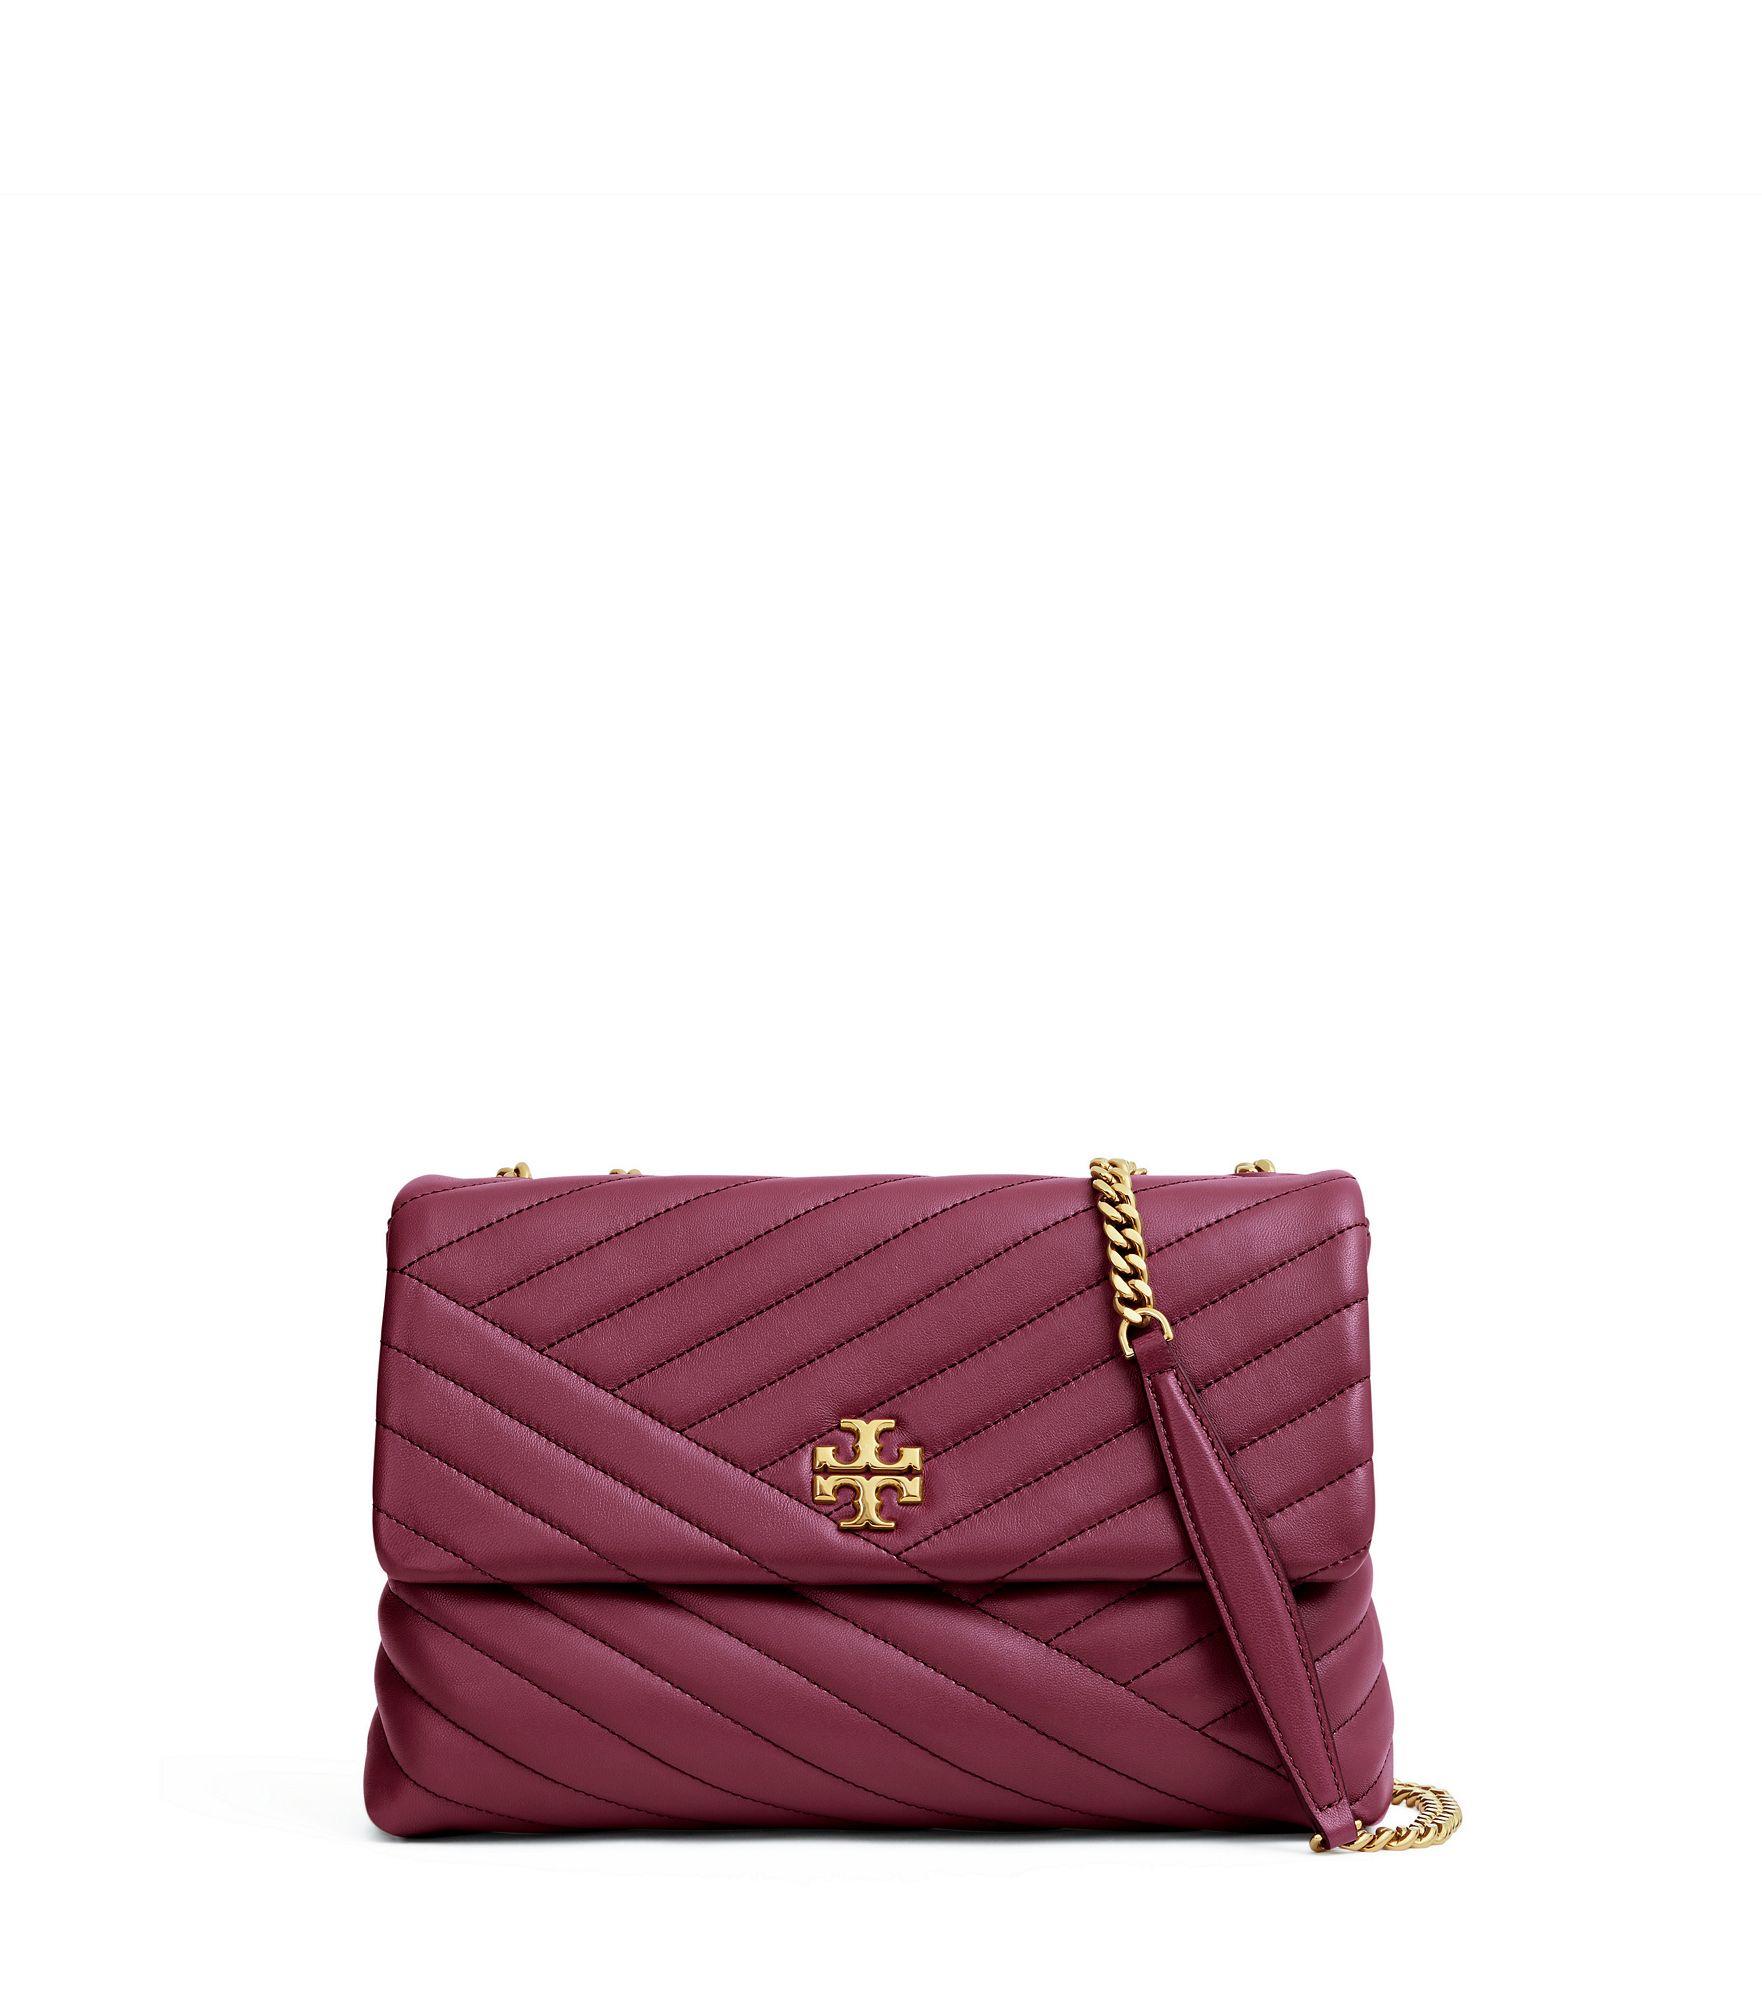 Tory Burch Kira Chevron Quilted Leather Shoulder Bag - Pink In